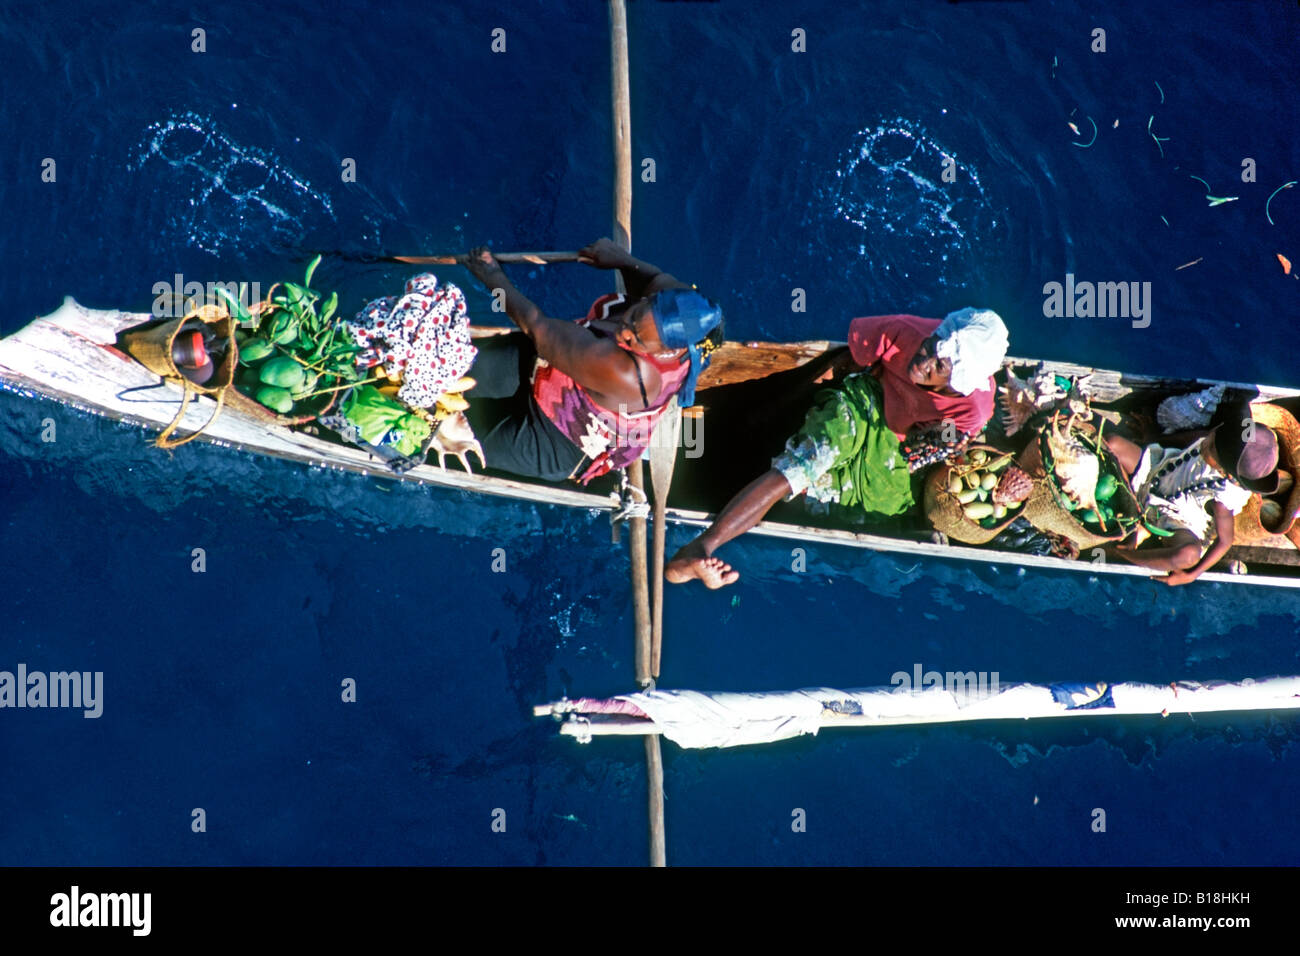 Local Malagasy people selling from boat Nosy Be island Madagascar Indian Ocean Stock Photo